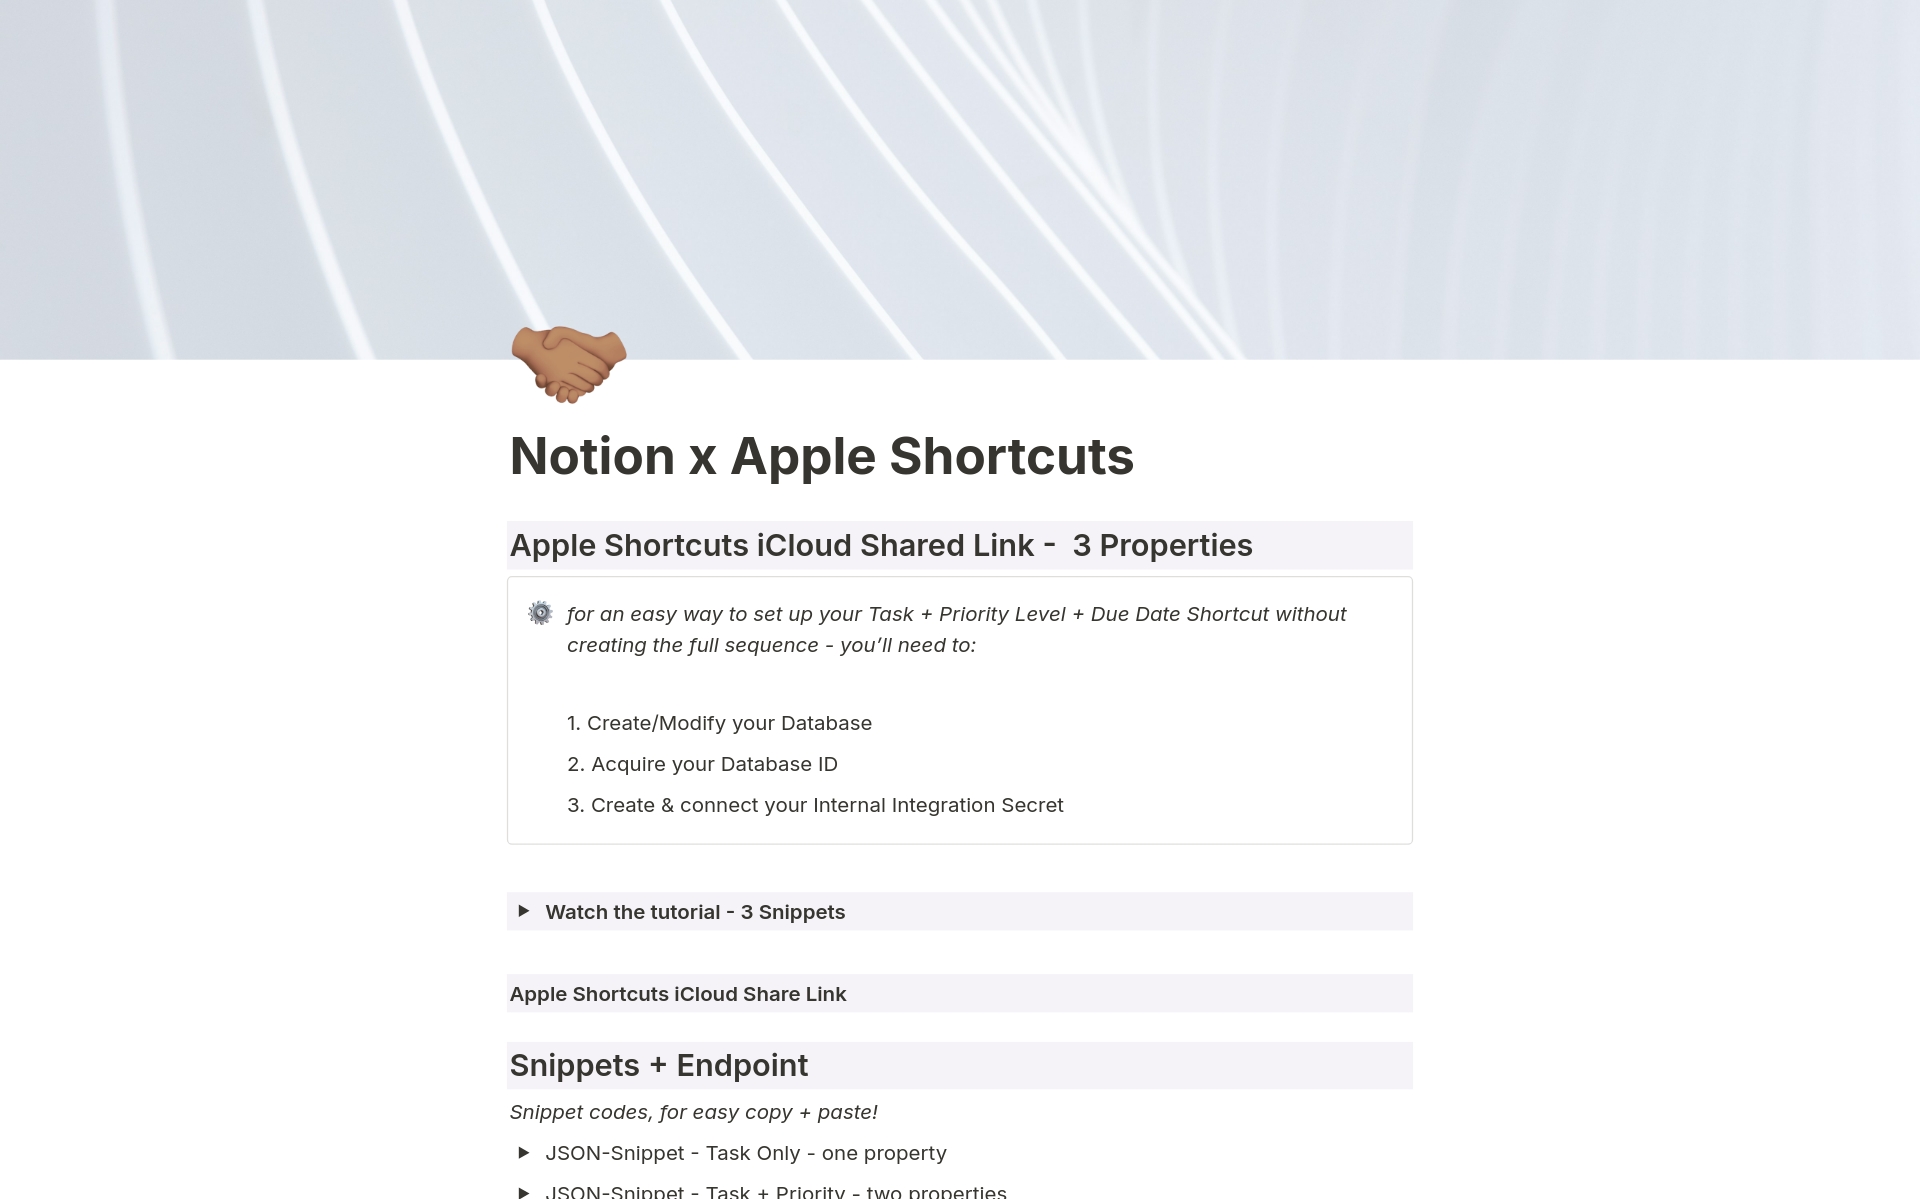 Unlock seamless productivity with our Notion x Apple Shortcuts guide! Learn to integrate tasks, priorities, and due dates effortlessly. Includes iCloud links, JSON snippets, and essential resources. Streamline your workflow and boost efficiency in no time! 